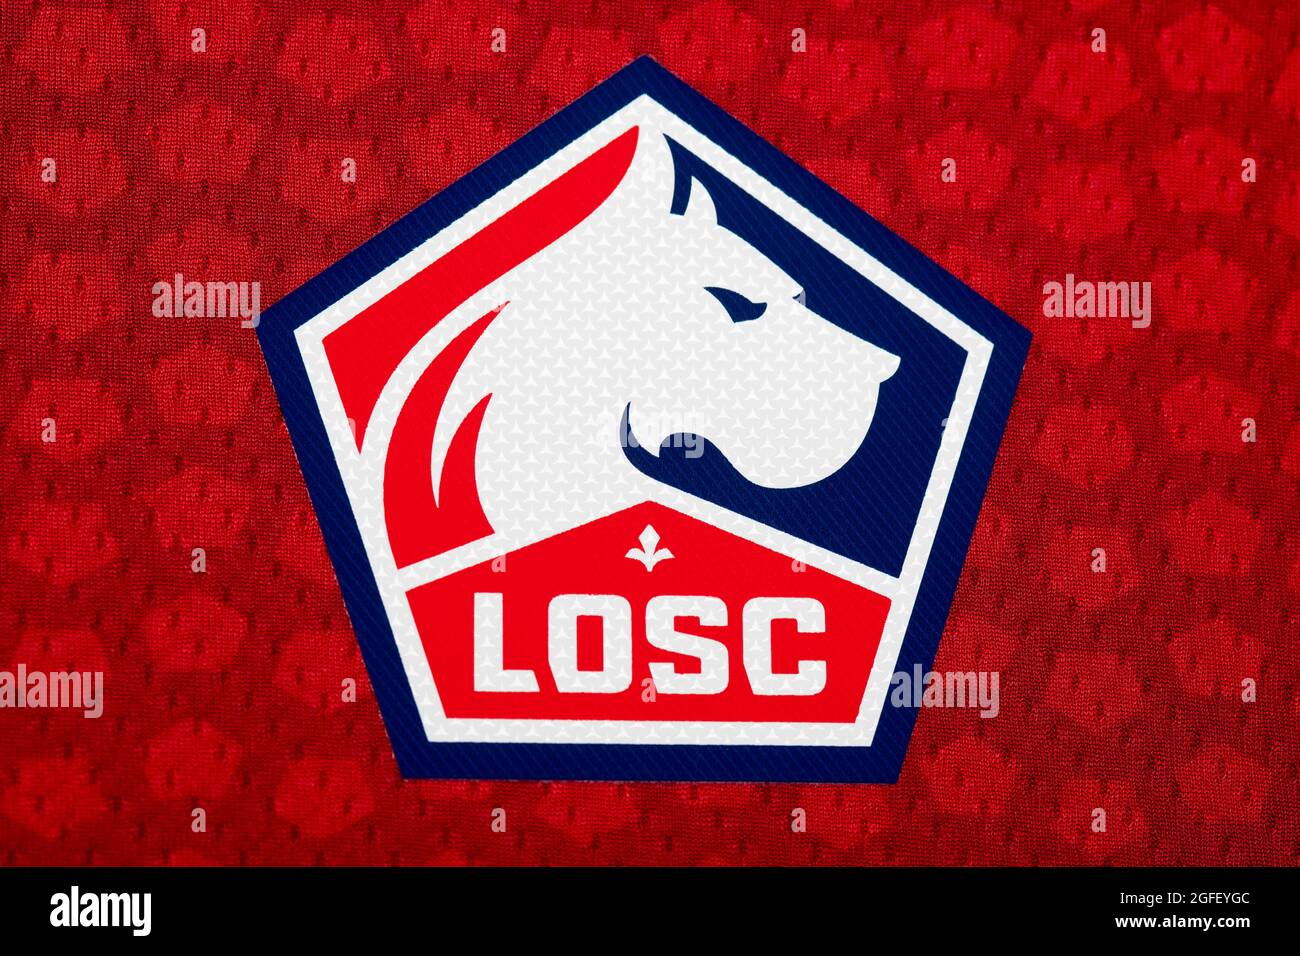 Close up of Lille OSC kit 2020/21. Stock Photo